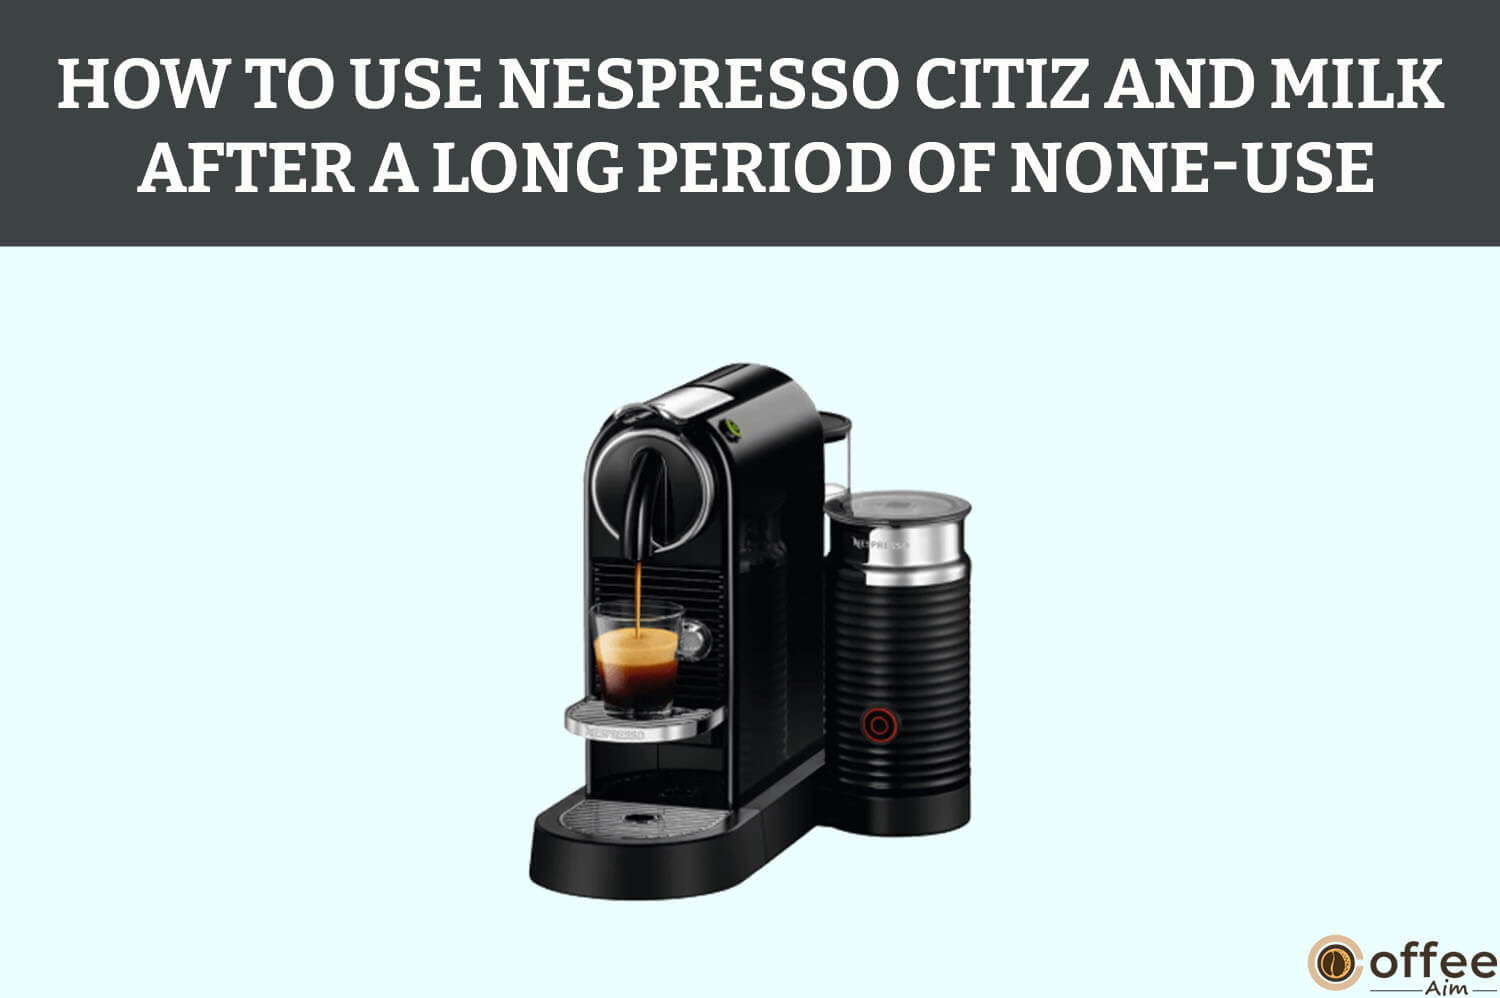 Featured image for the article "How To Use Nespresso CitiZ And Milk After A Long Period Of None-Use"